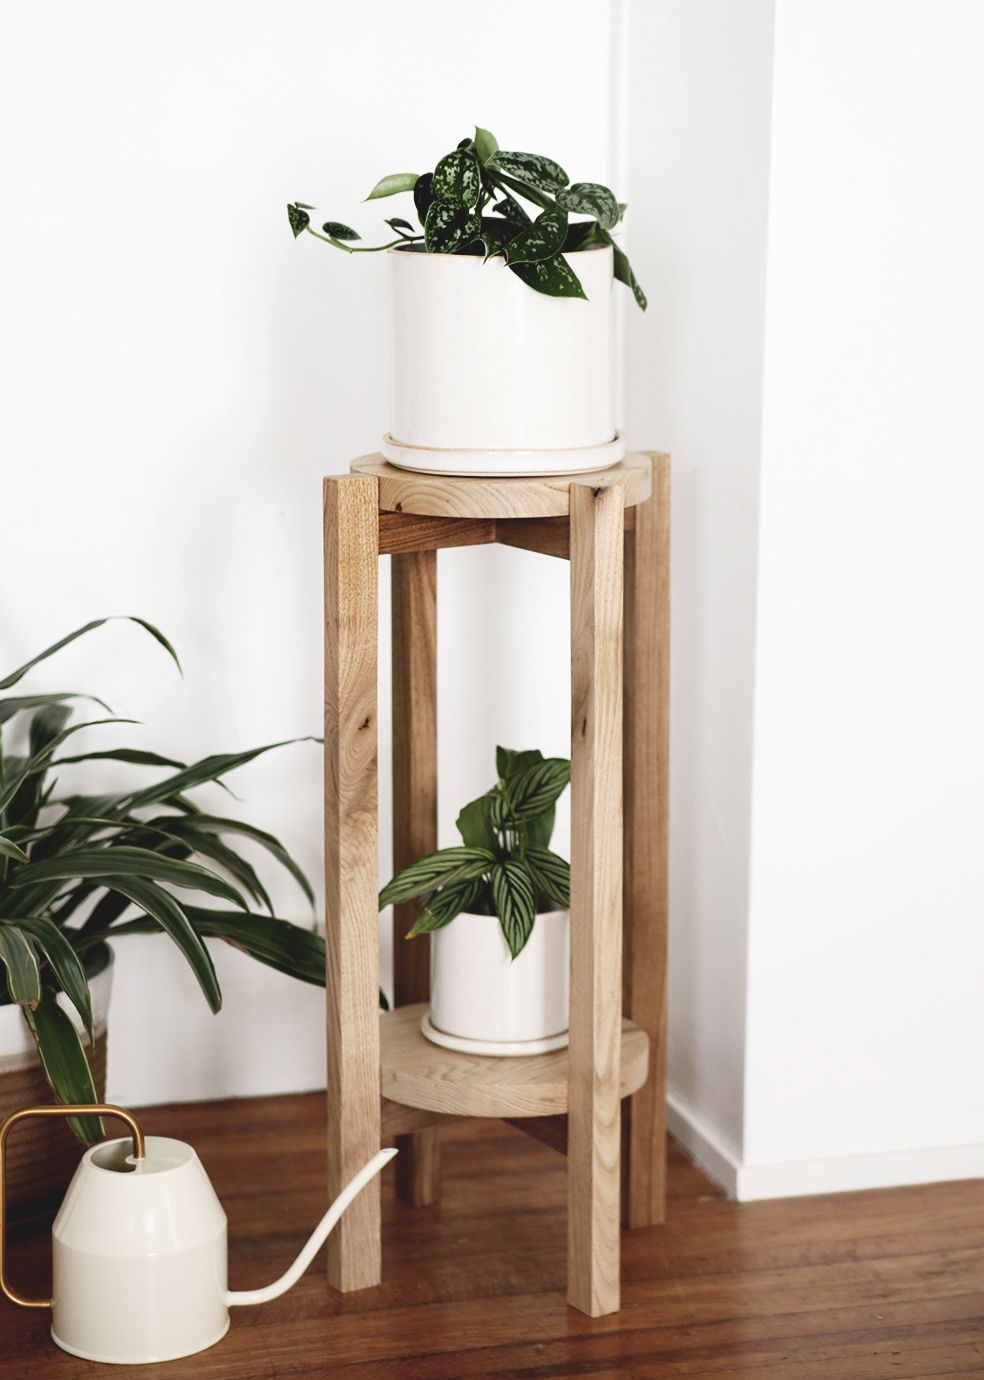 Well Known Diy Wood Plant Stand – A Simple Diy With A Video Tutorial Regarding Wooden Plant Stands (View 5 of 15)